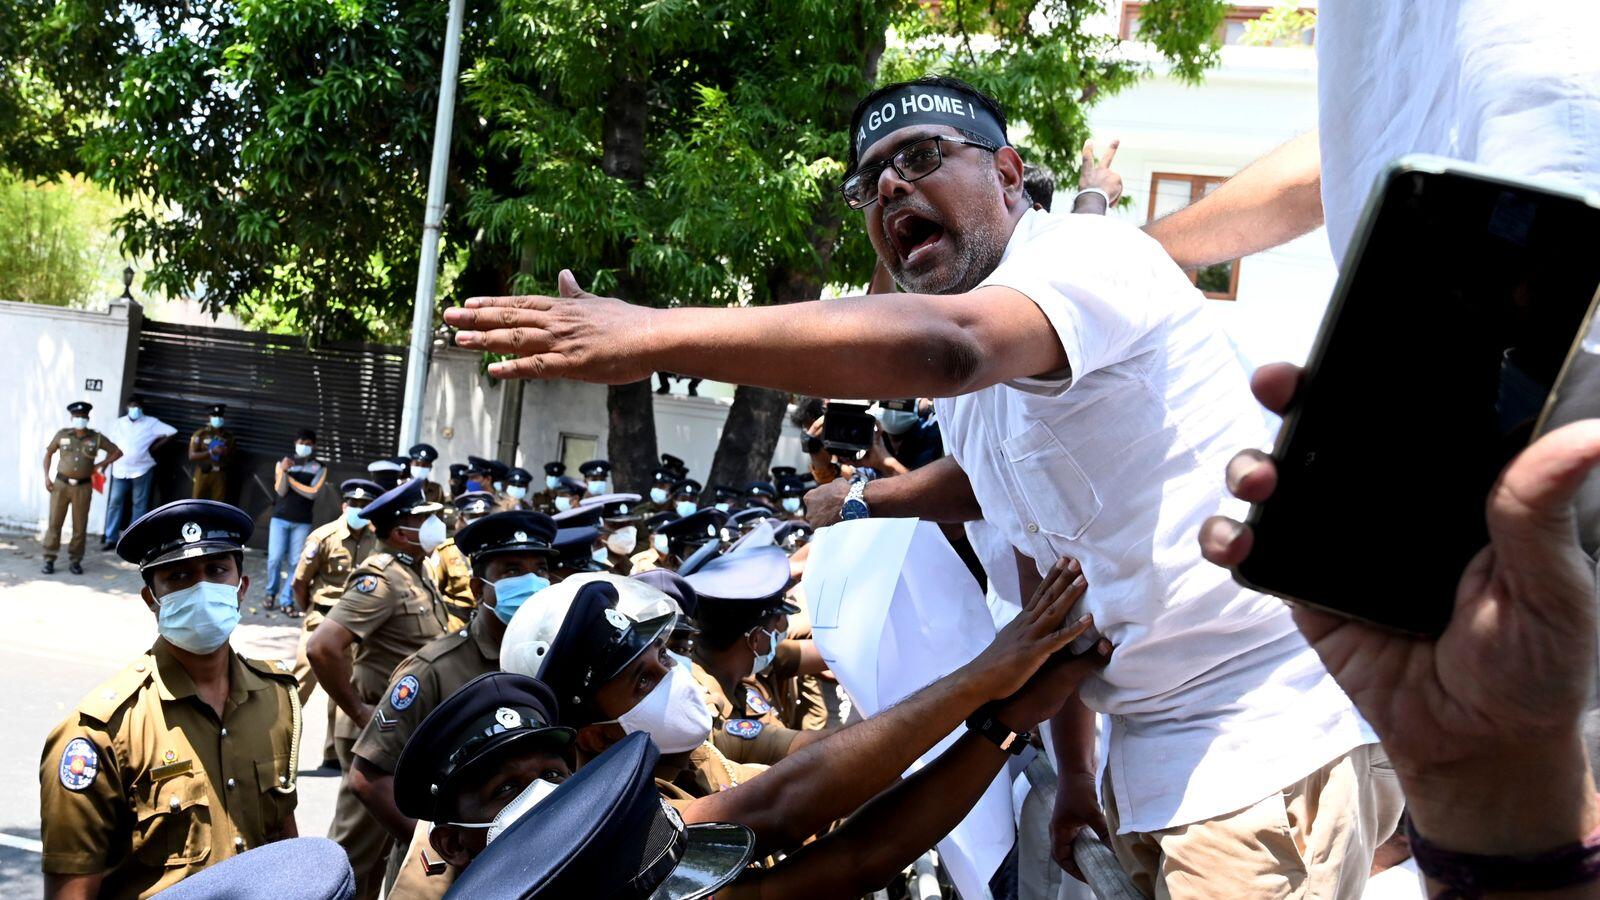 Sri Lanka: Anti-government protesters leave Galle Face promenade after 123 days - News